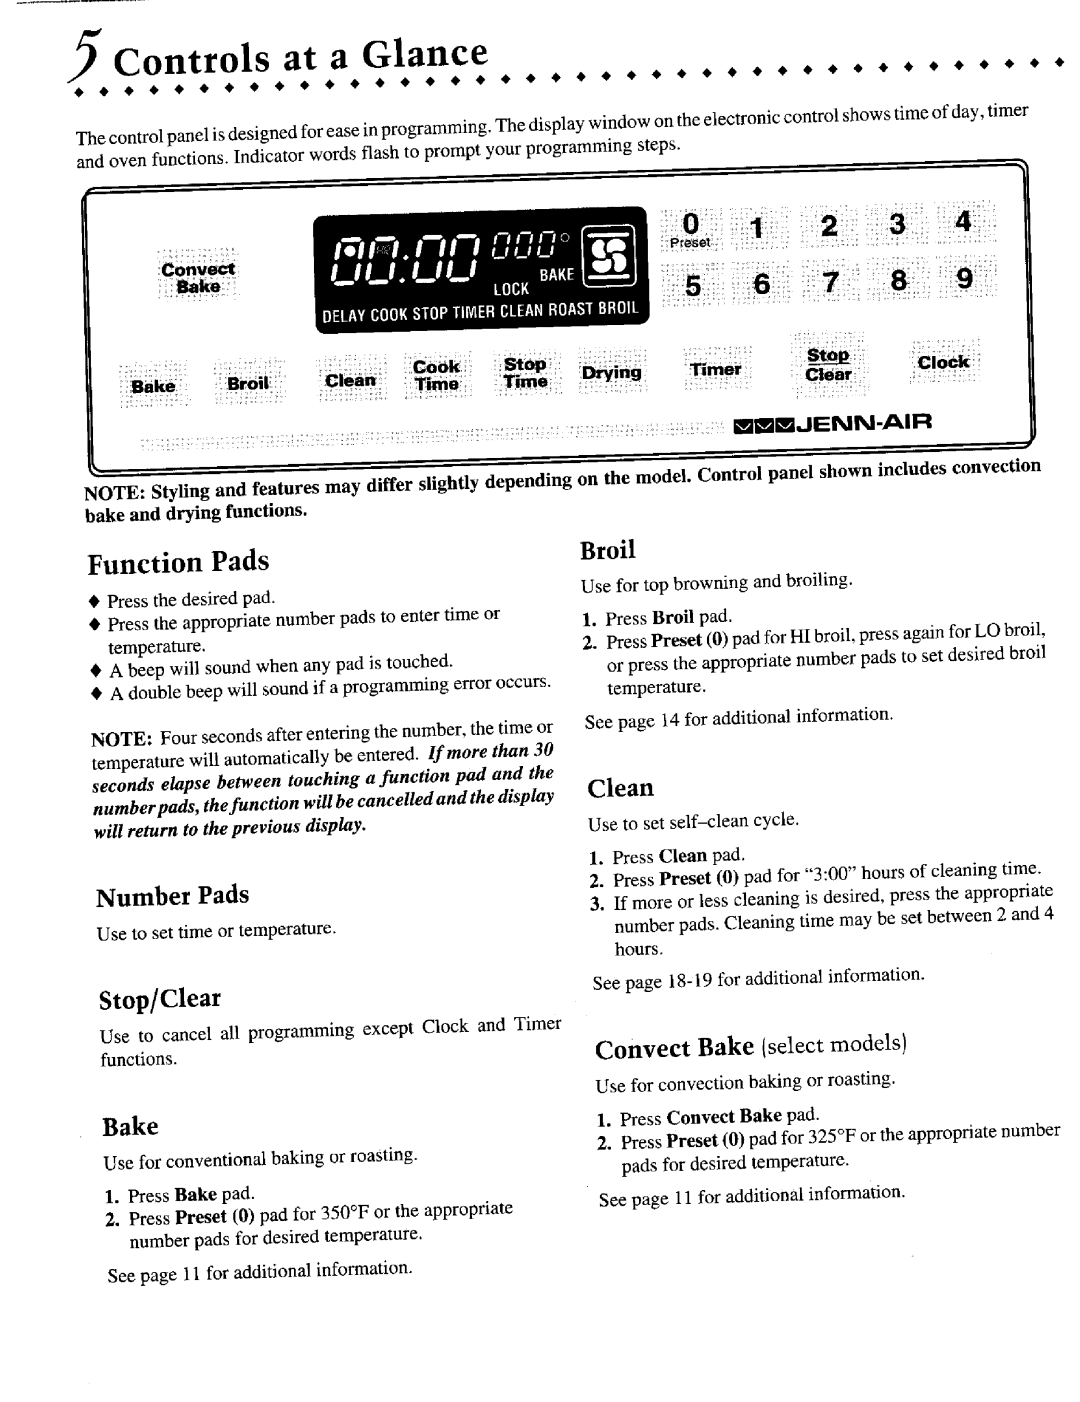 Jenn-Air JGR8855 Controls at a Glance, Stop/Clear, Function Pads, Broil, Convect Bake selectmodels, Number Pads, Clean 